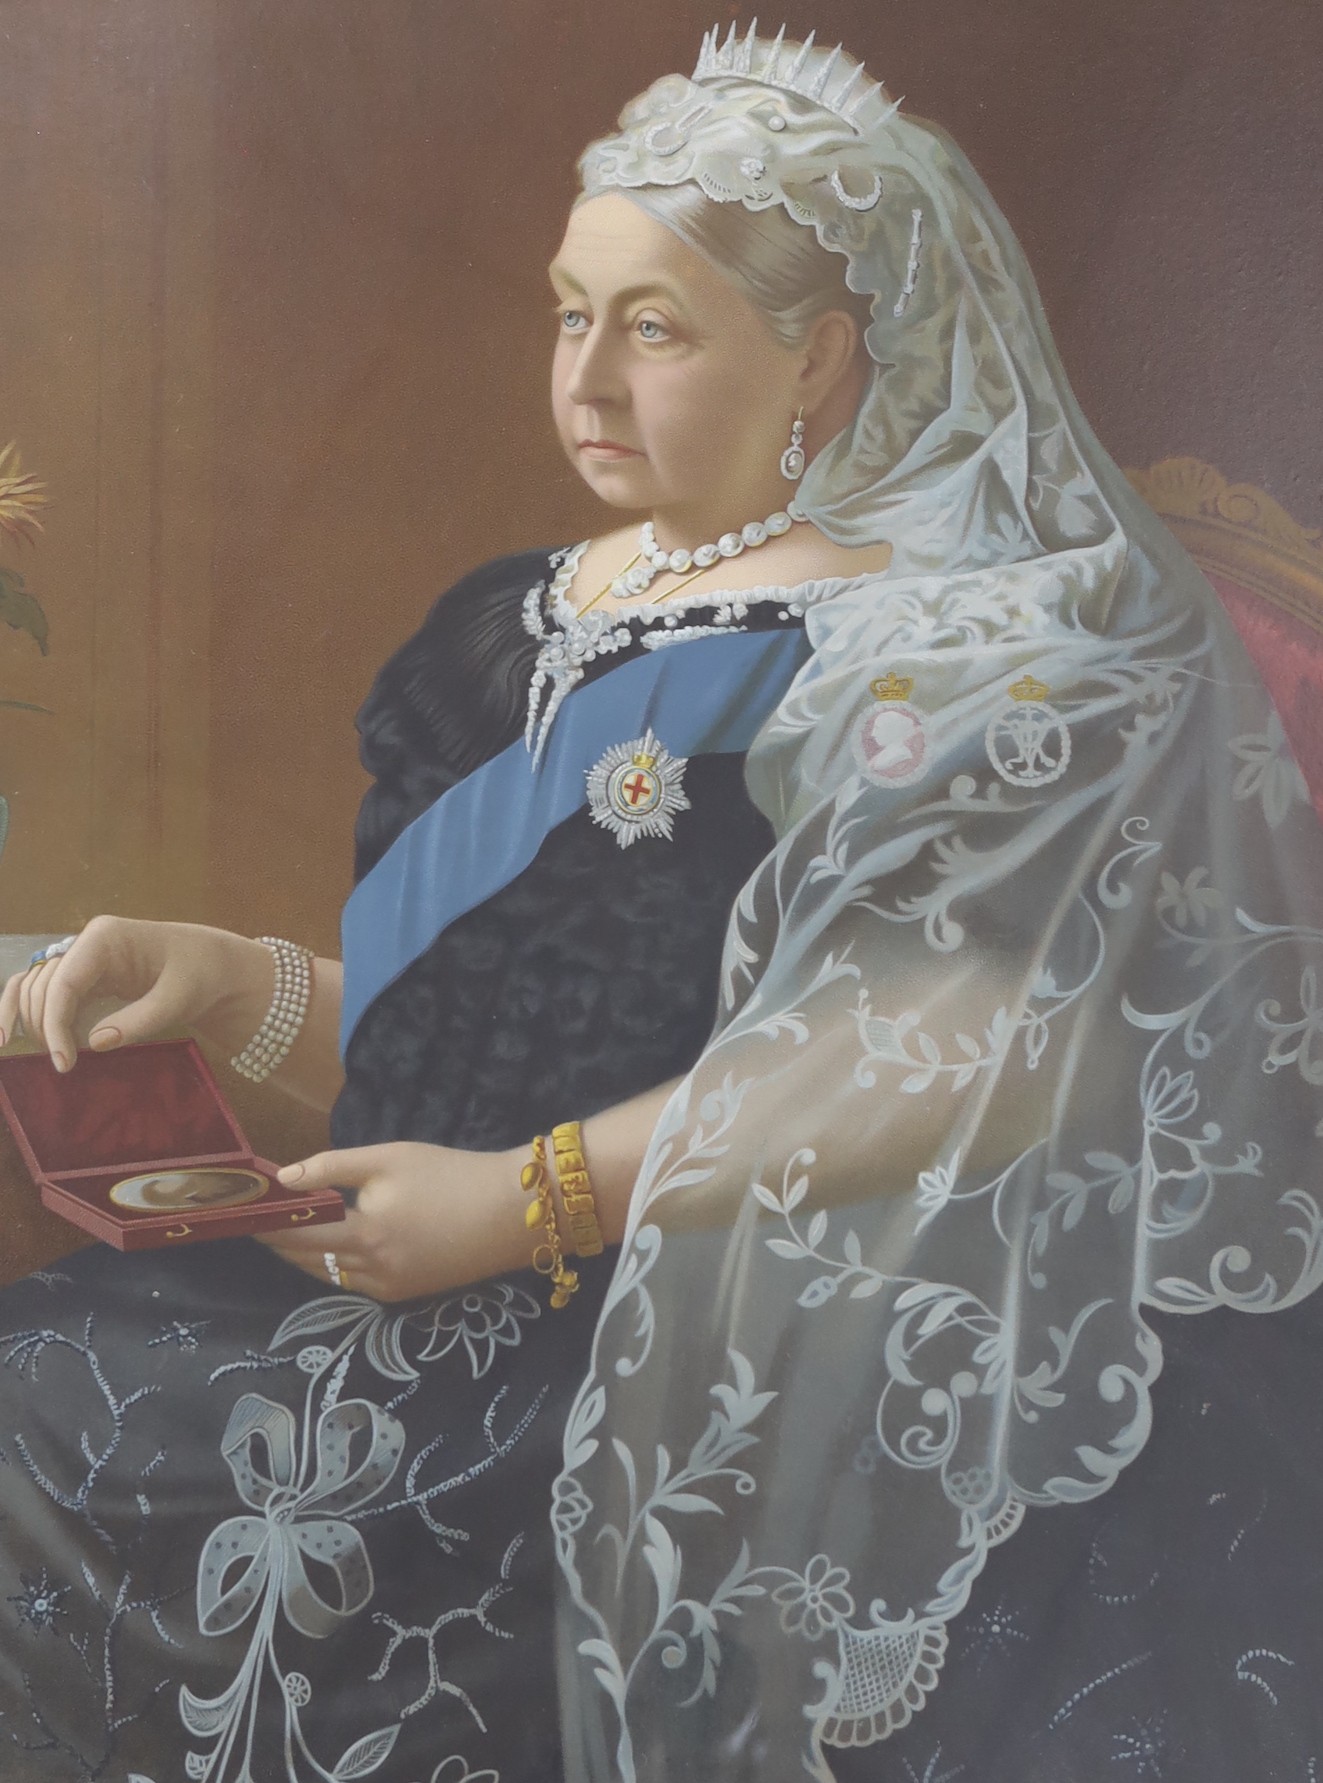 Alfred Cooke publ., chromolithograph, Portrait of Queen Victoria, the Sovereign of 60 years, 60 x 49cm, another chromolithograph, The late Majesty, Queen Victoria, 84 x 74cm, and an 1887 Jubilee portrait